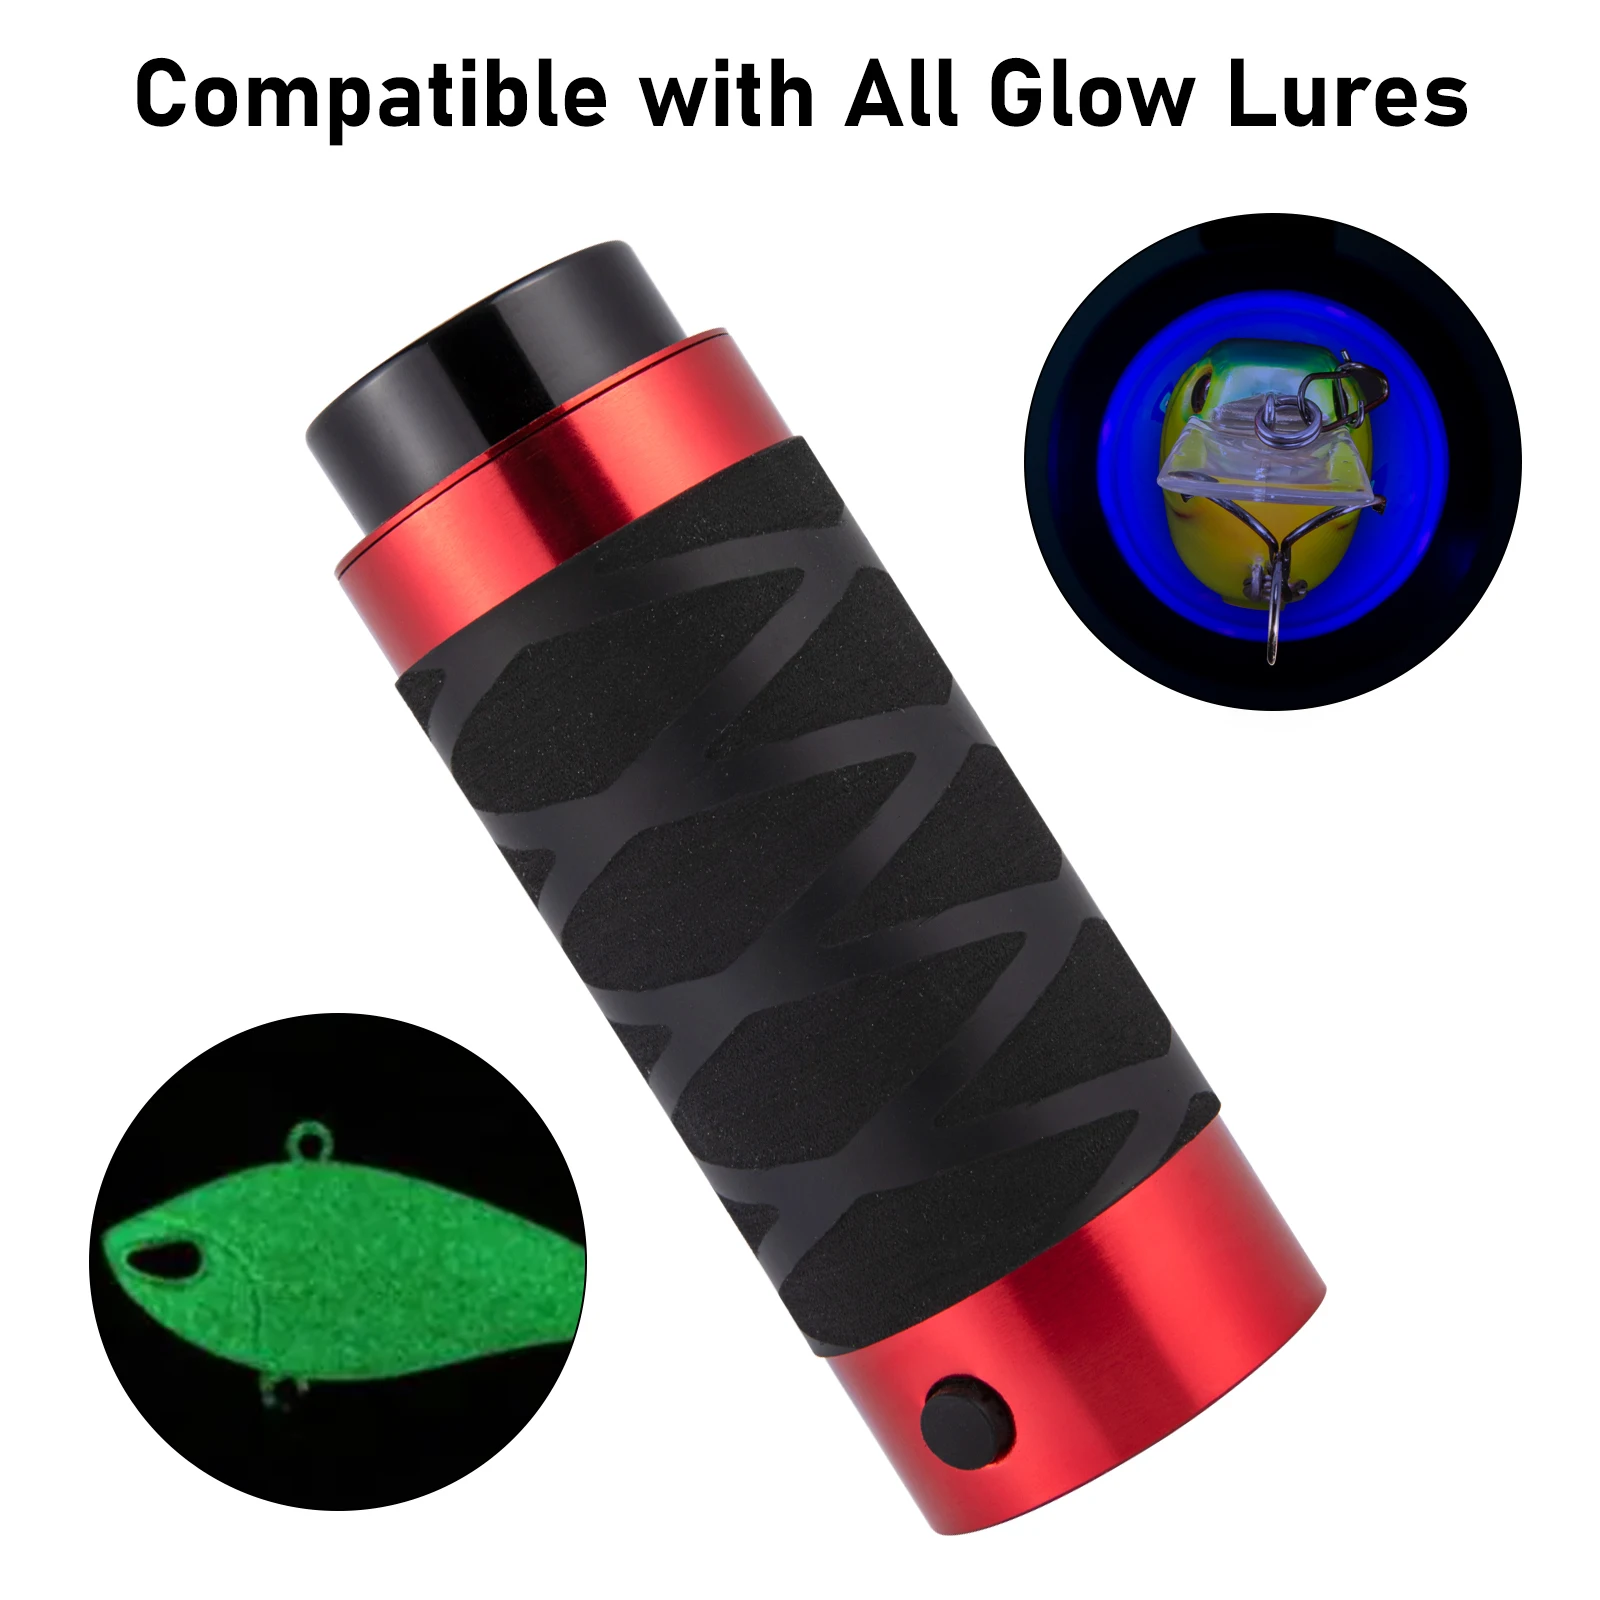 LED Glow Lure Charger UV Light for Glow in the Dark Lure Jig Soft Bait Hard  Bait Spoon Portable USB Chargeable 24 Hours Battery